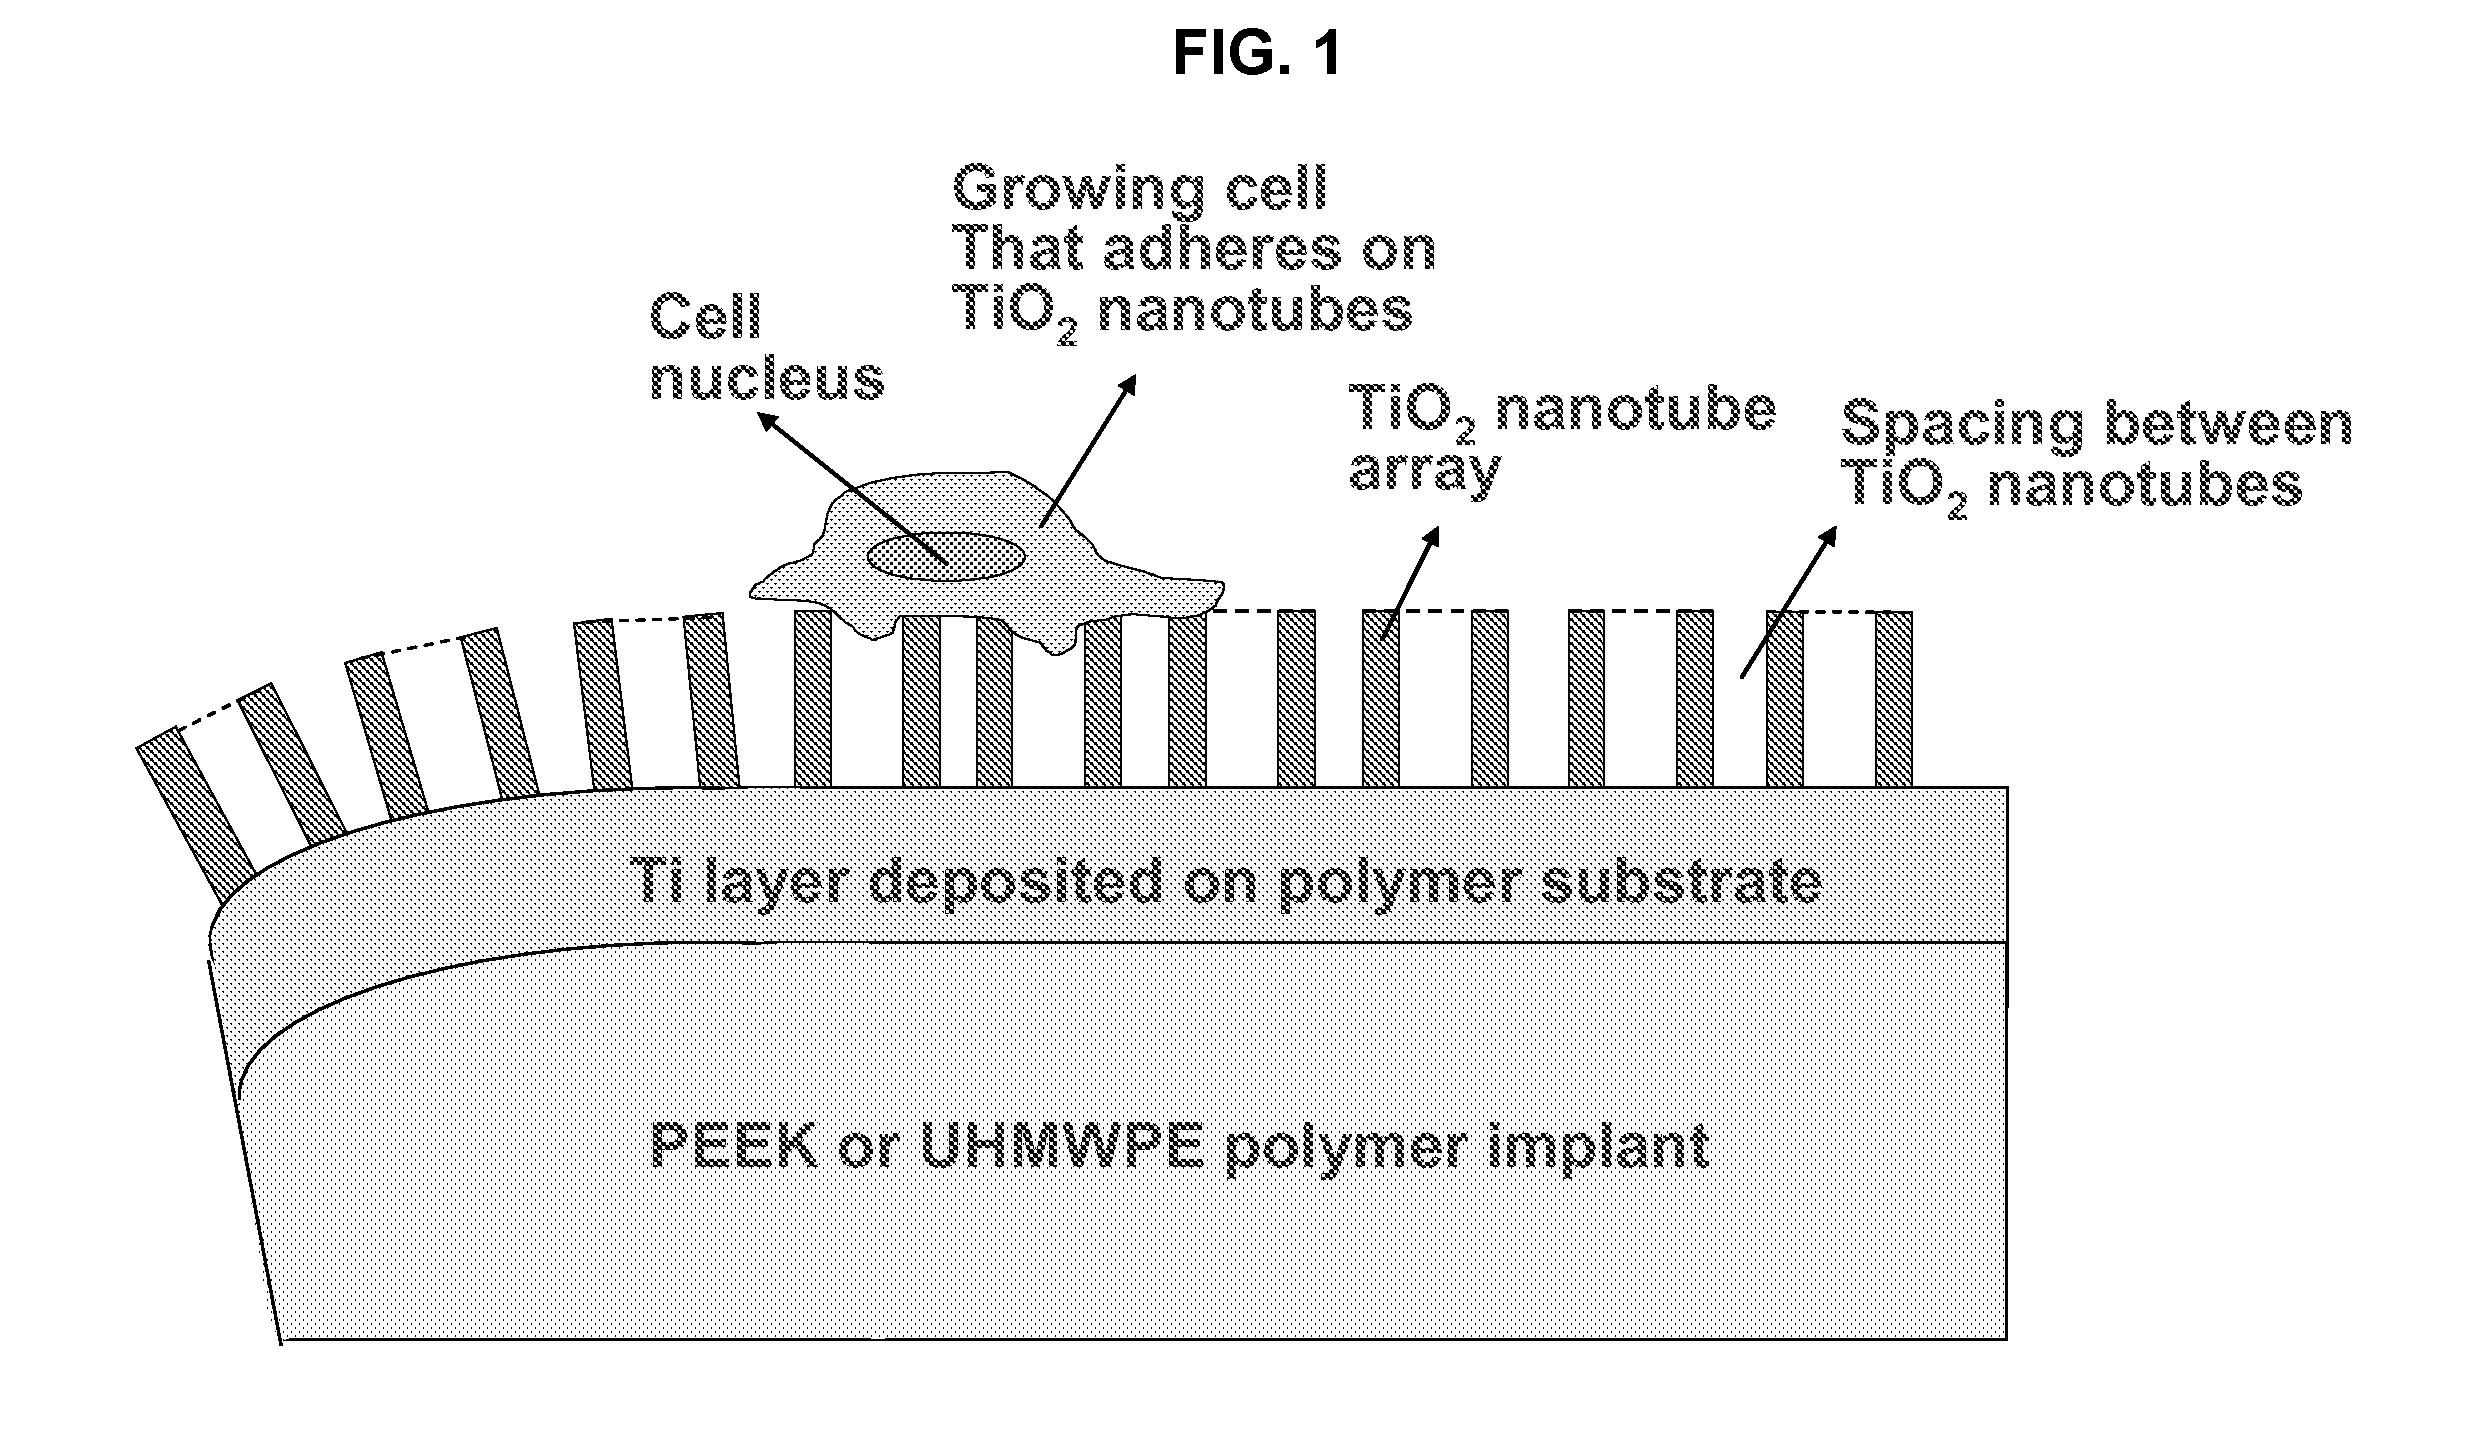 Inorganically surface-modified polymers and methods for making and using them